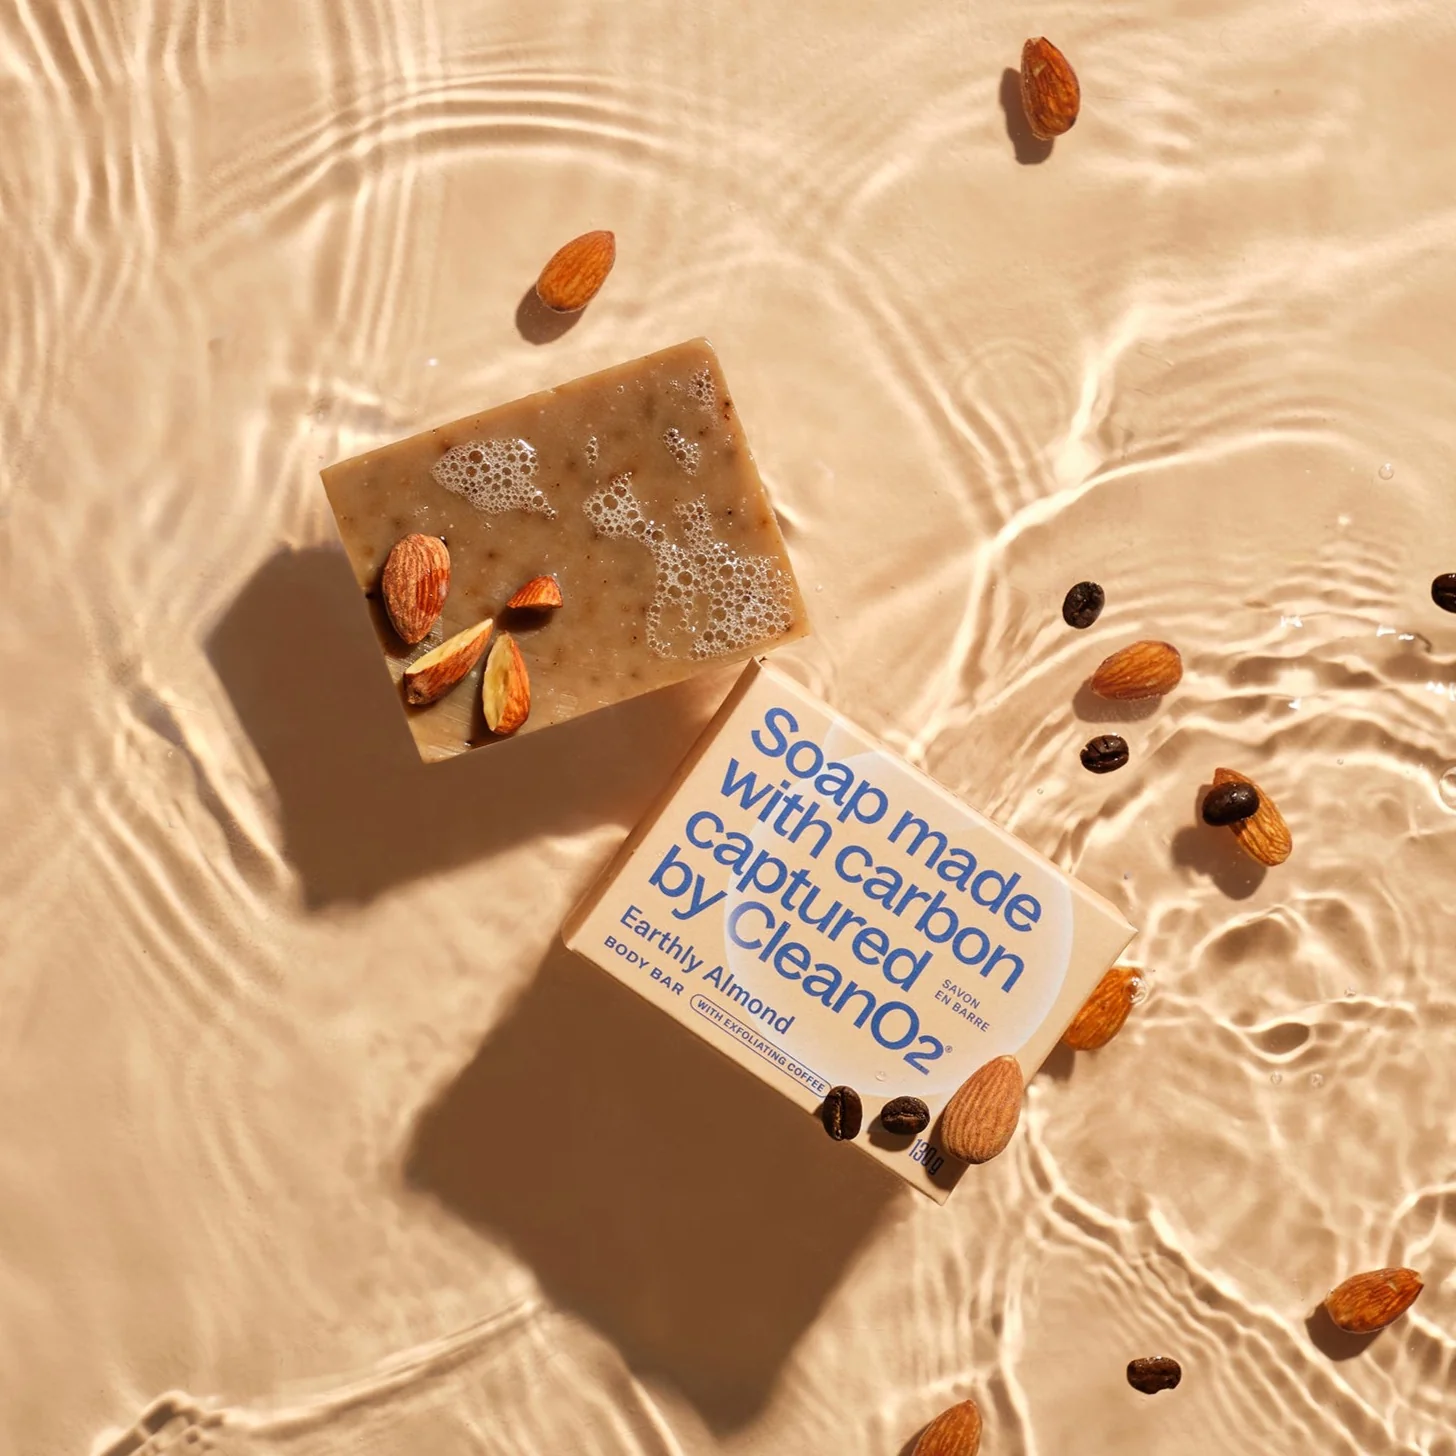 Carbon Capture Soap | Earthly Almond